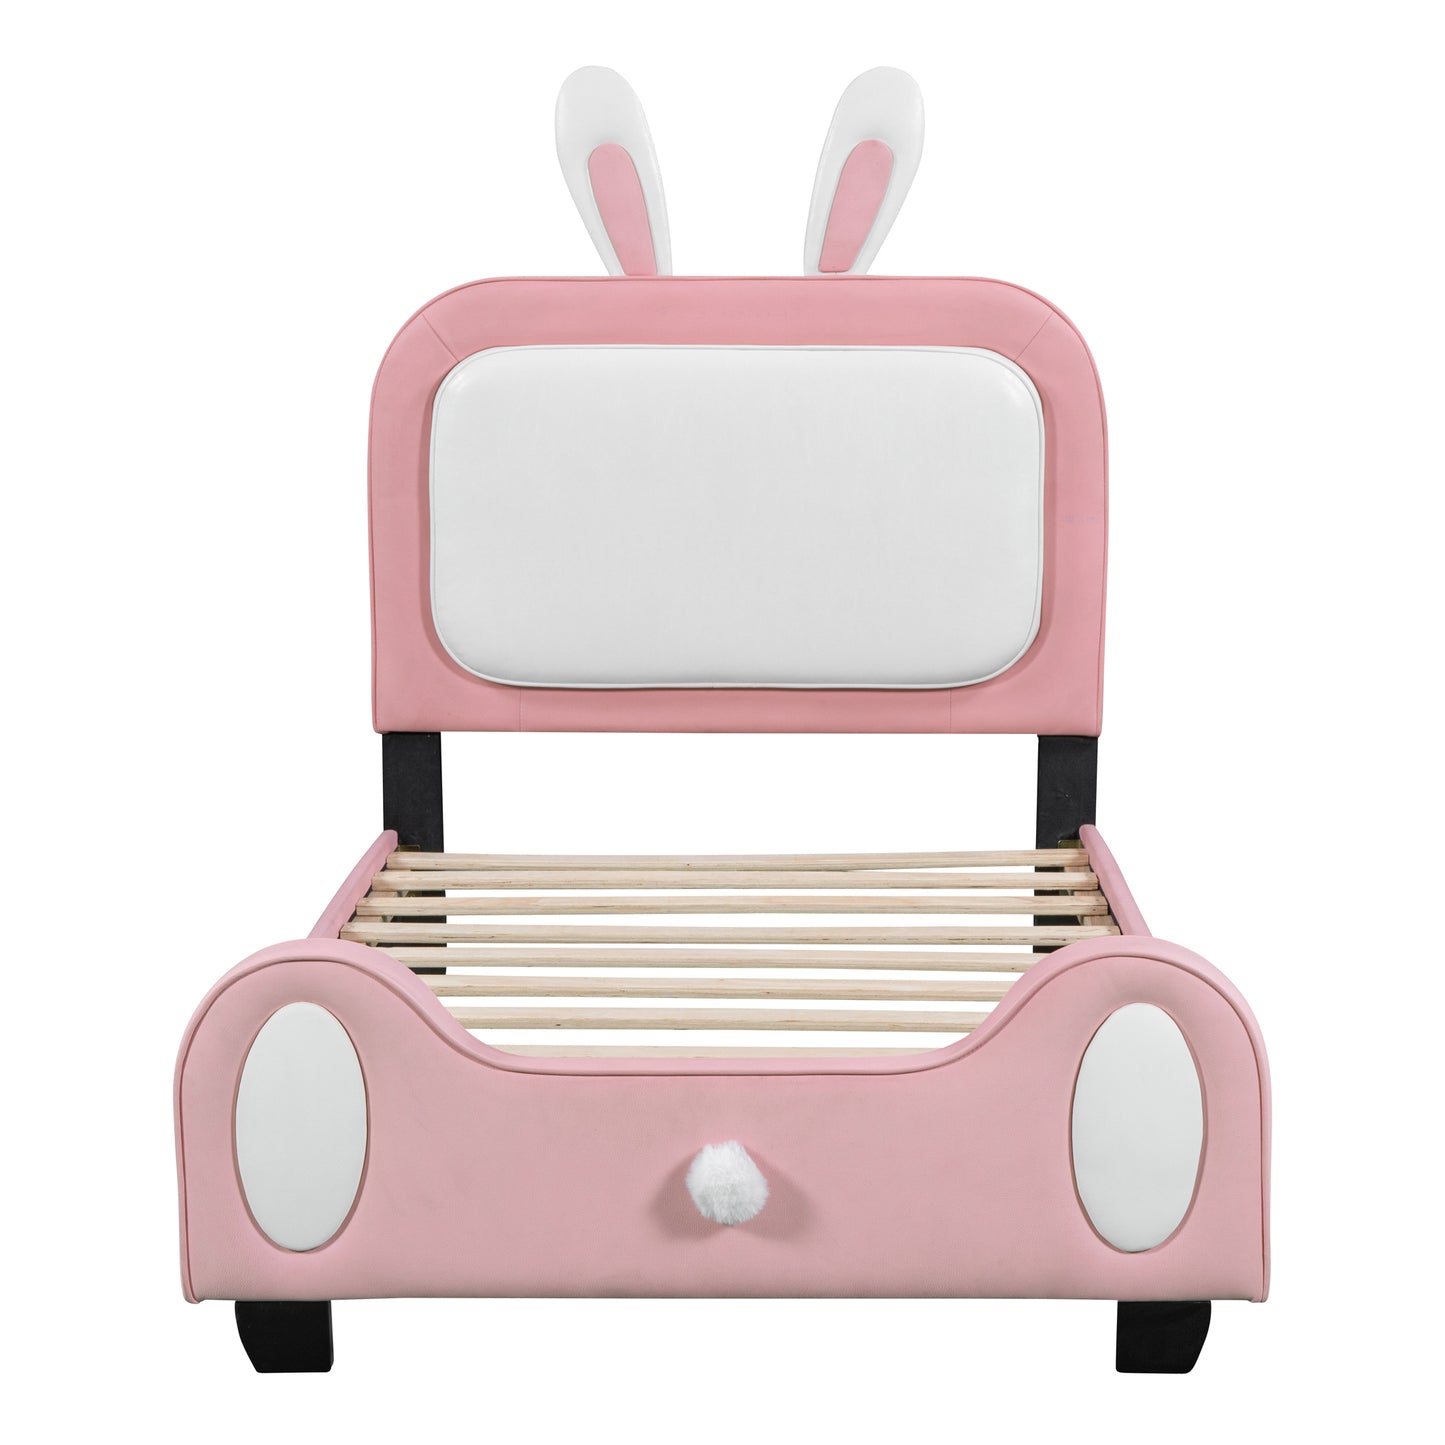 Twin size Upholstered Rabbit-Shape Princess Bed ,Twin Size Platform Bed with Headboard and Footboard,White+Pink